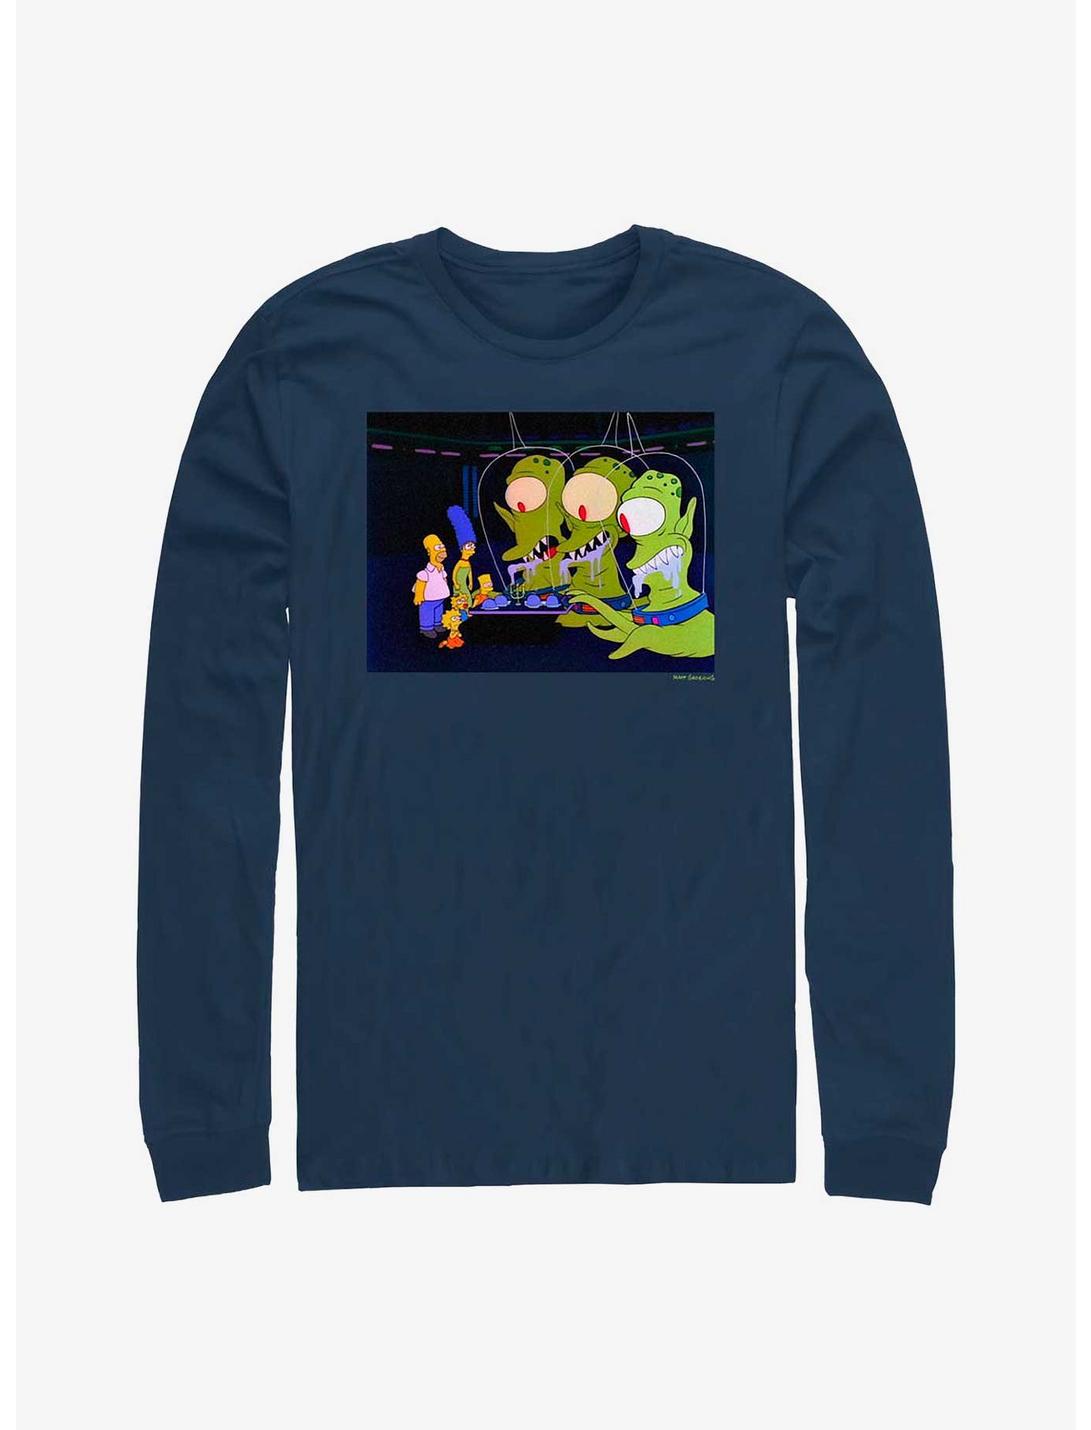 The Simpsons Treehouse Of Horrow Episode One Aliens Long-Sleeve T-Shirt, NAVY, hi-res